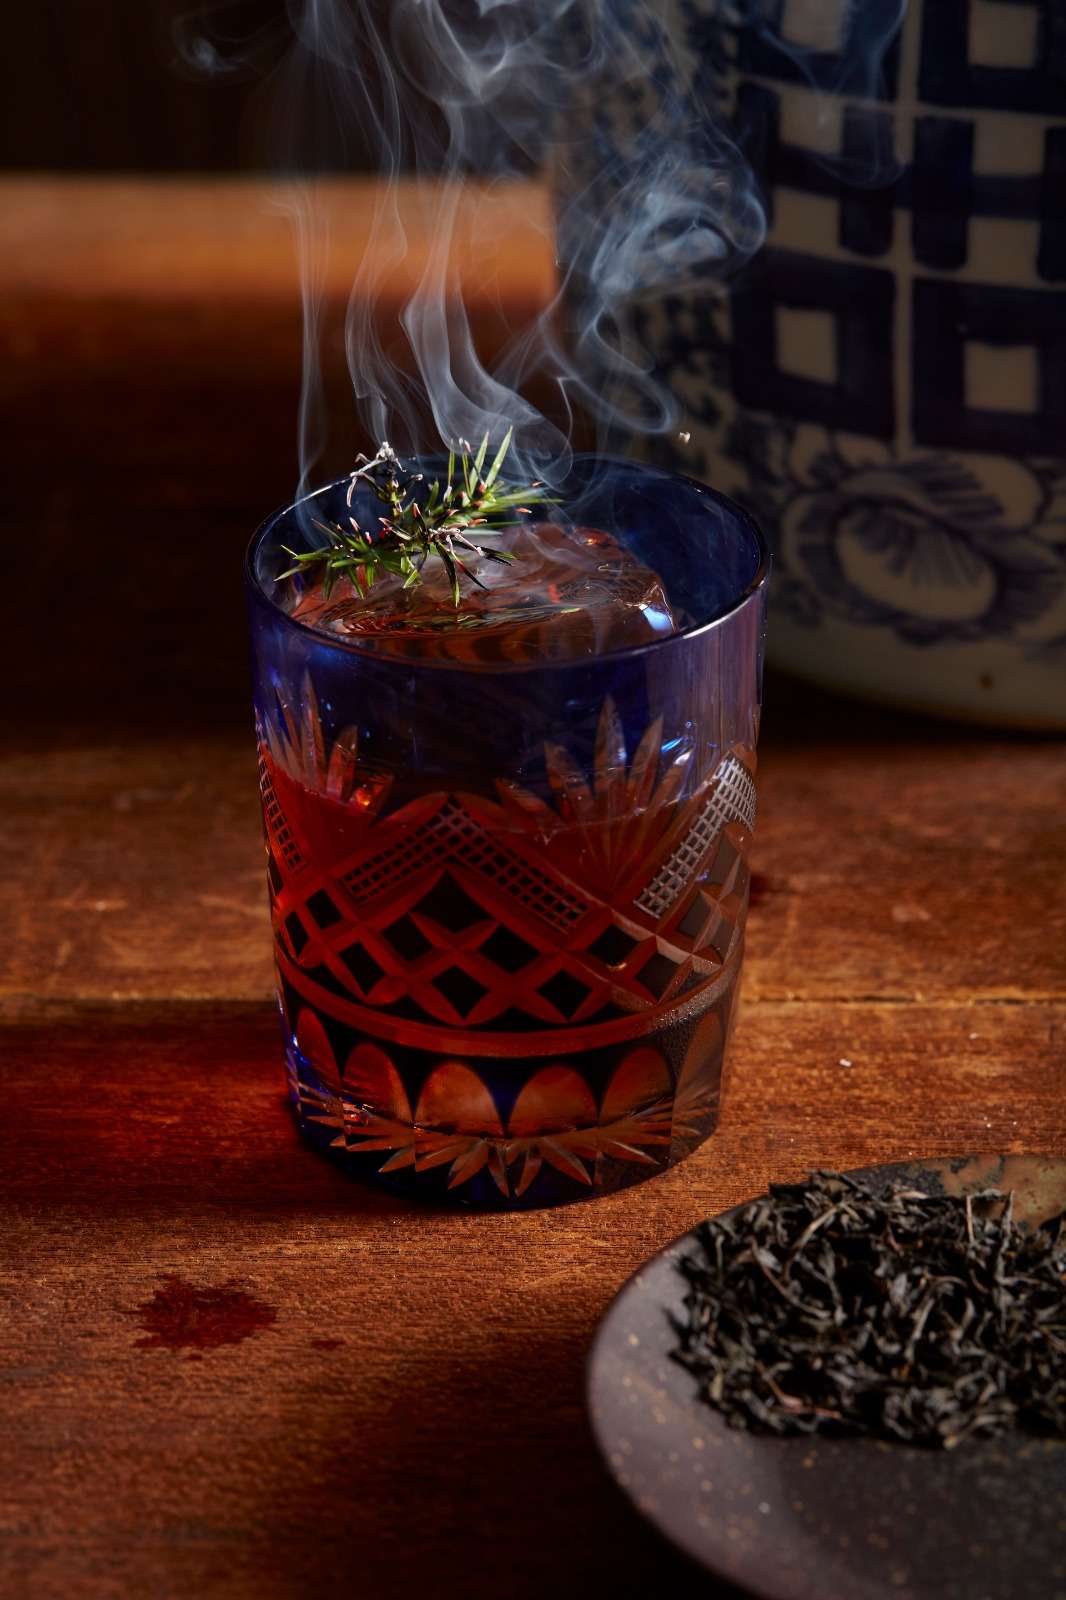 Fujian Negroni, which features smoky Lapsang Souchong Tea for a slightly stiffer taste with a bittersweet profile. Best paired with Mott 32’ Signature Smoked Black Cod.